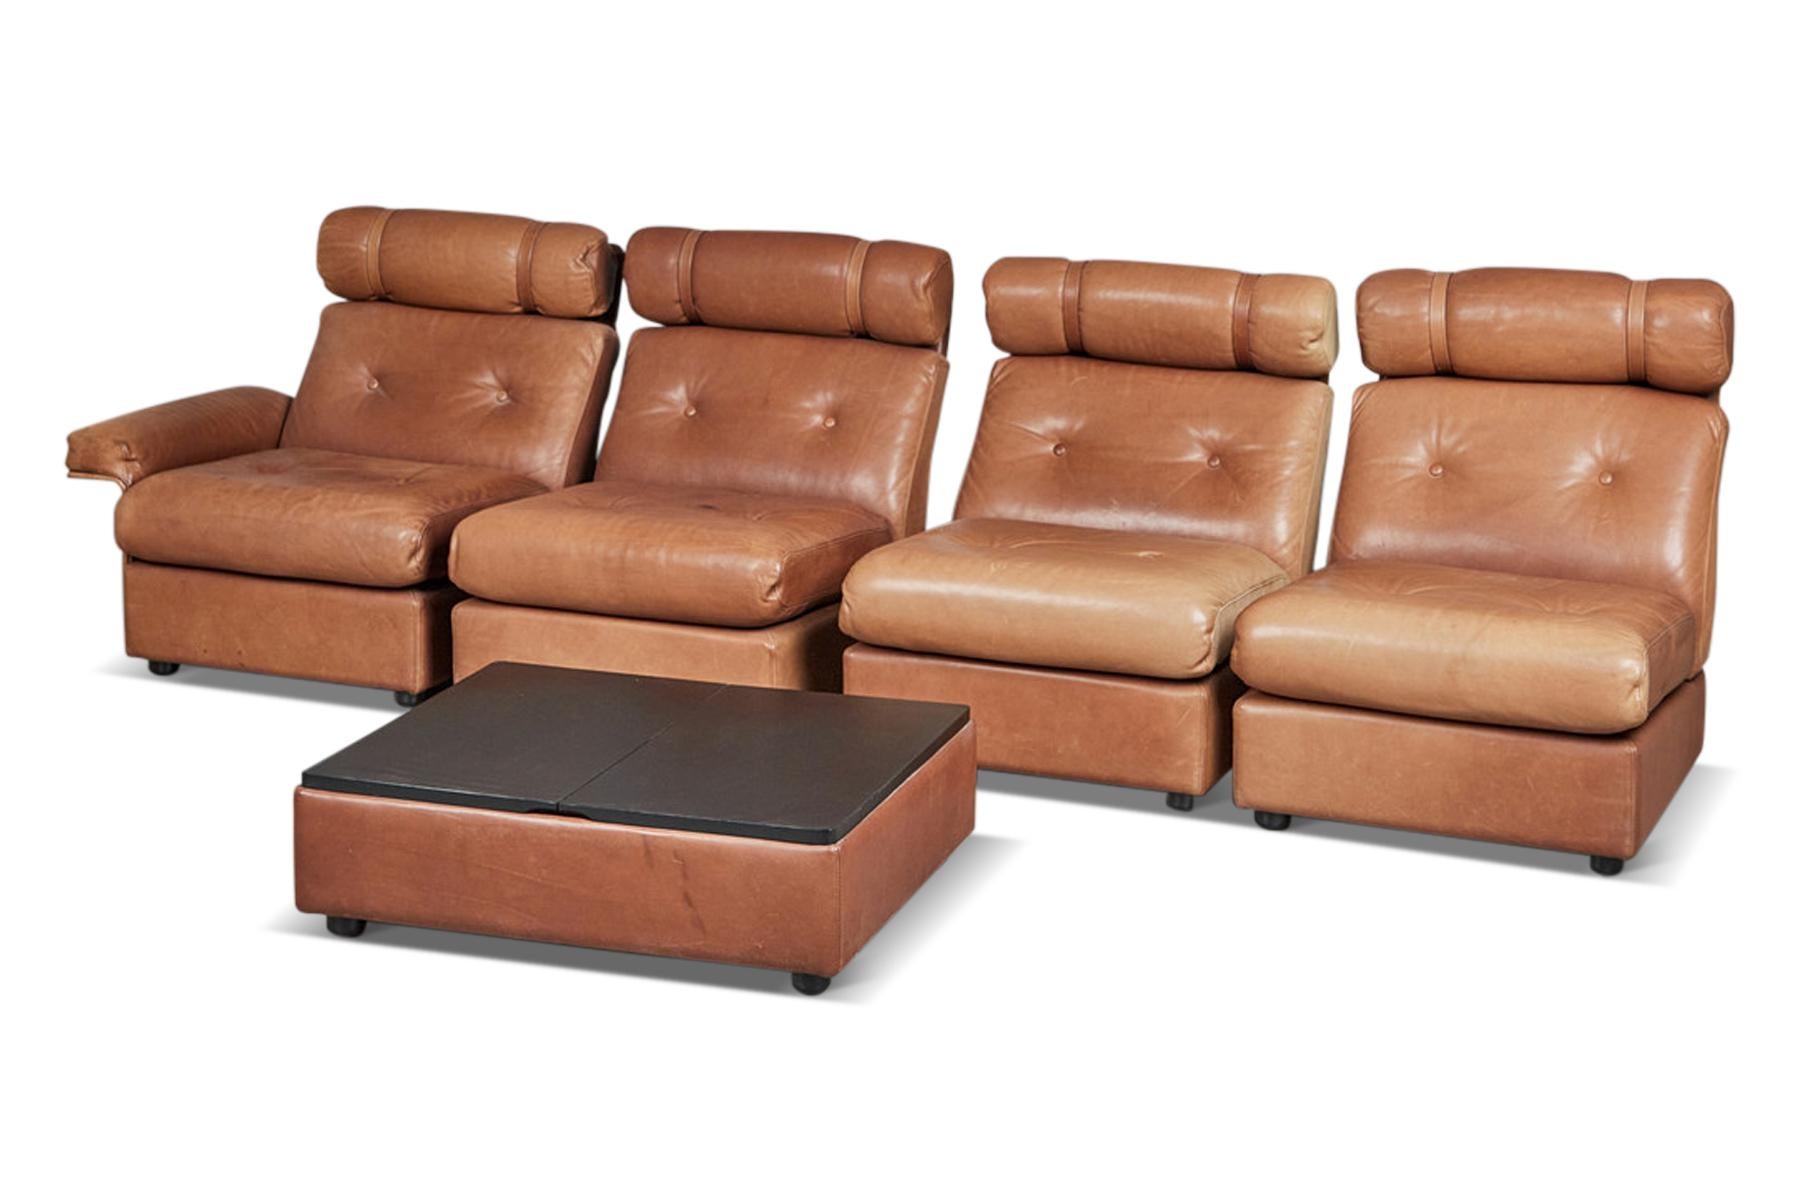 1970s Highback Leather Sectional Sofa in Cognac Buffalo Leather For Sale 4